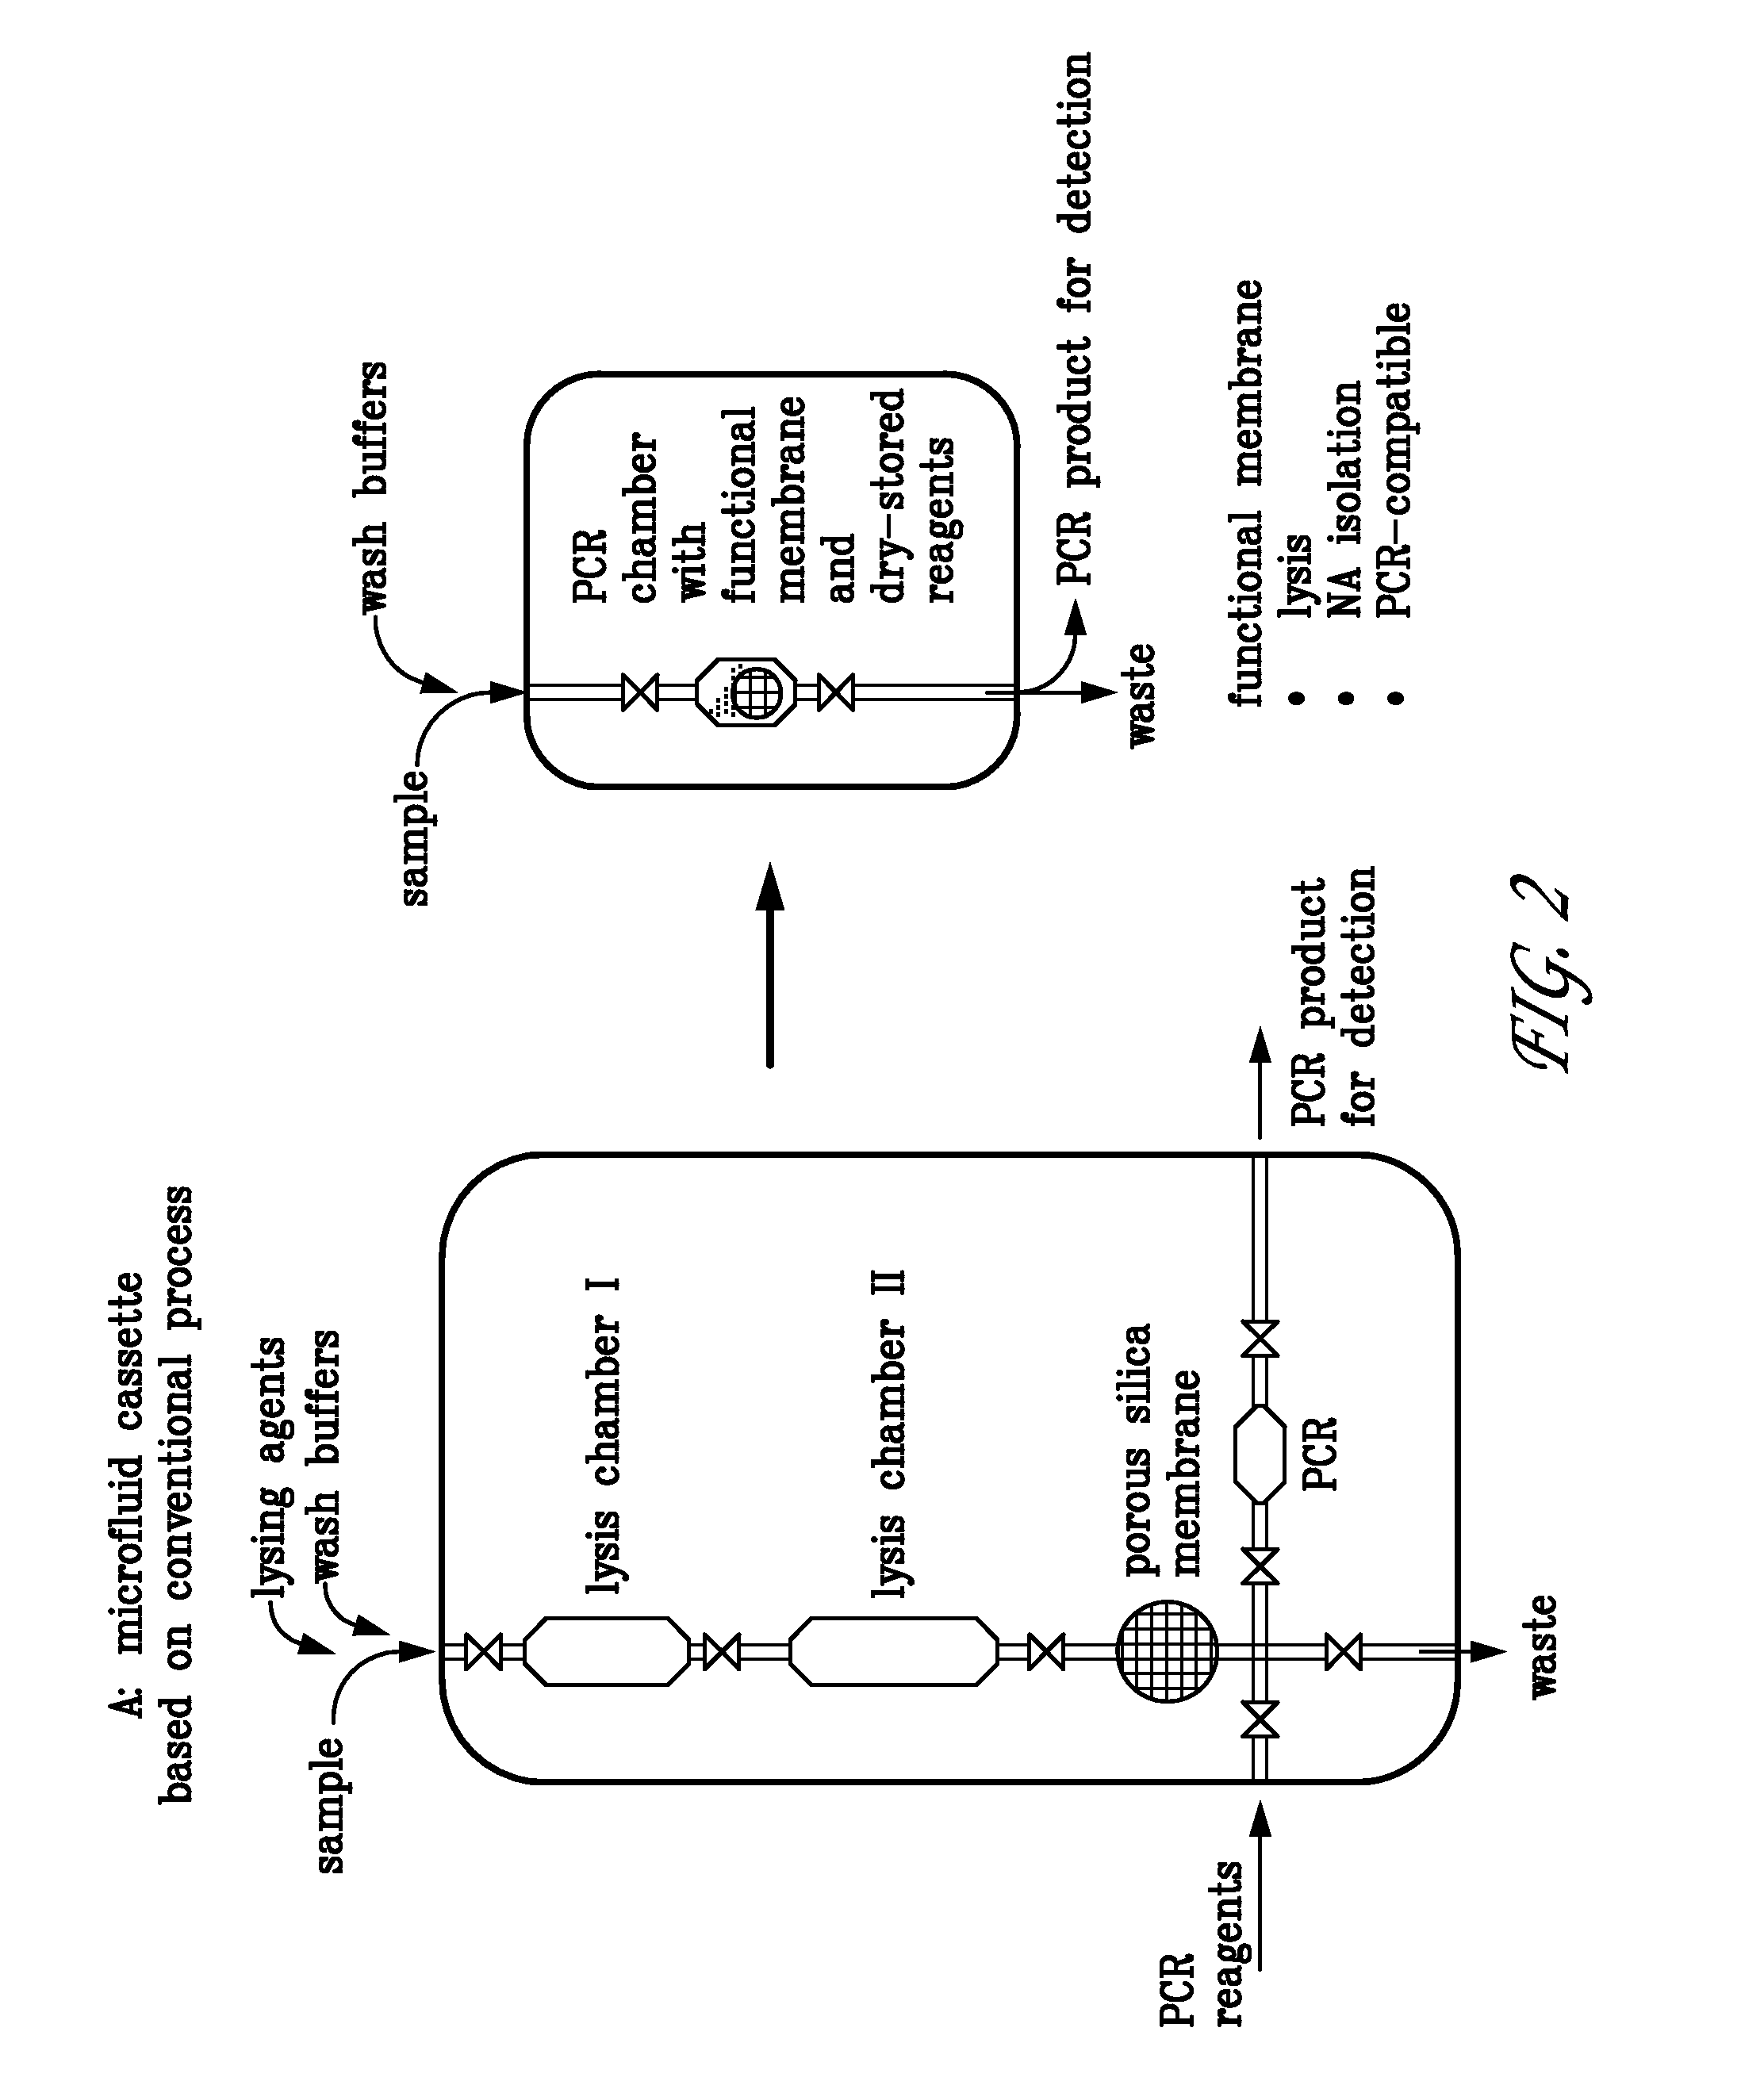 Integrated PCR Reactor for Cell Lysis, Nucleic Acid Isolation and Purification, and Nucleic Acid Amplication Related Applications